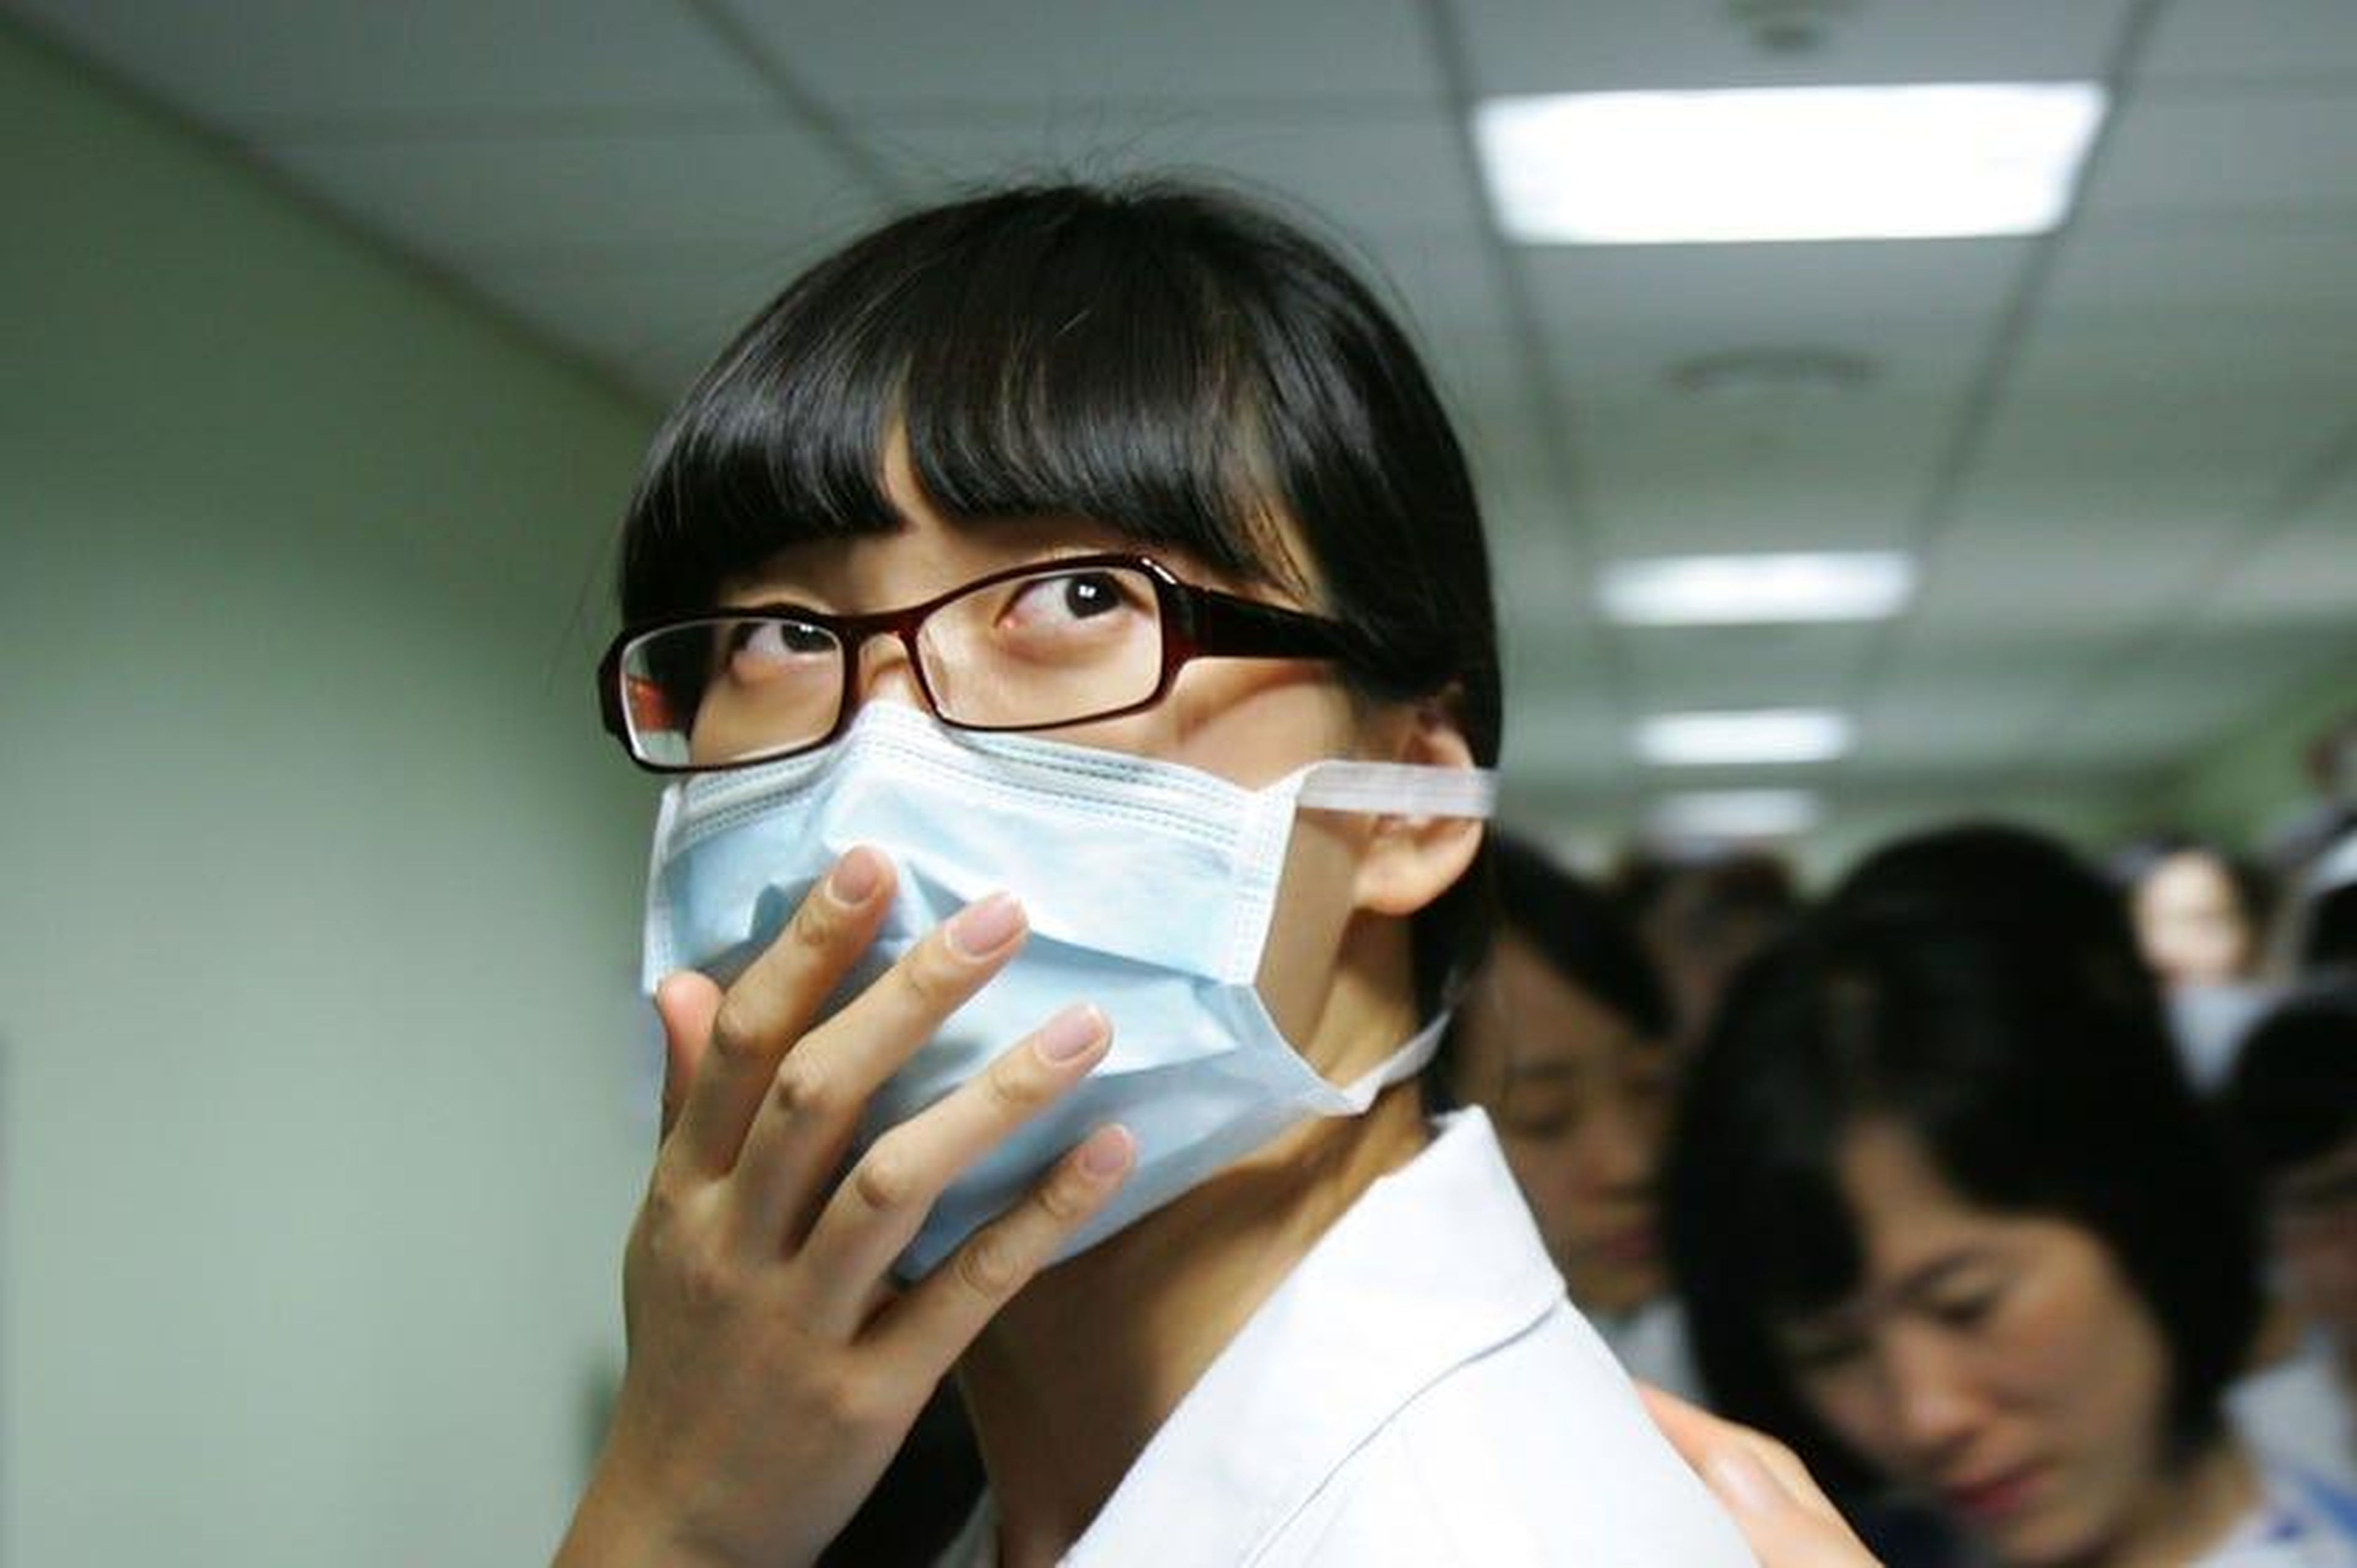 A doctor wears a mask during the H1N1 flu outbreak.